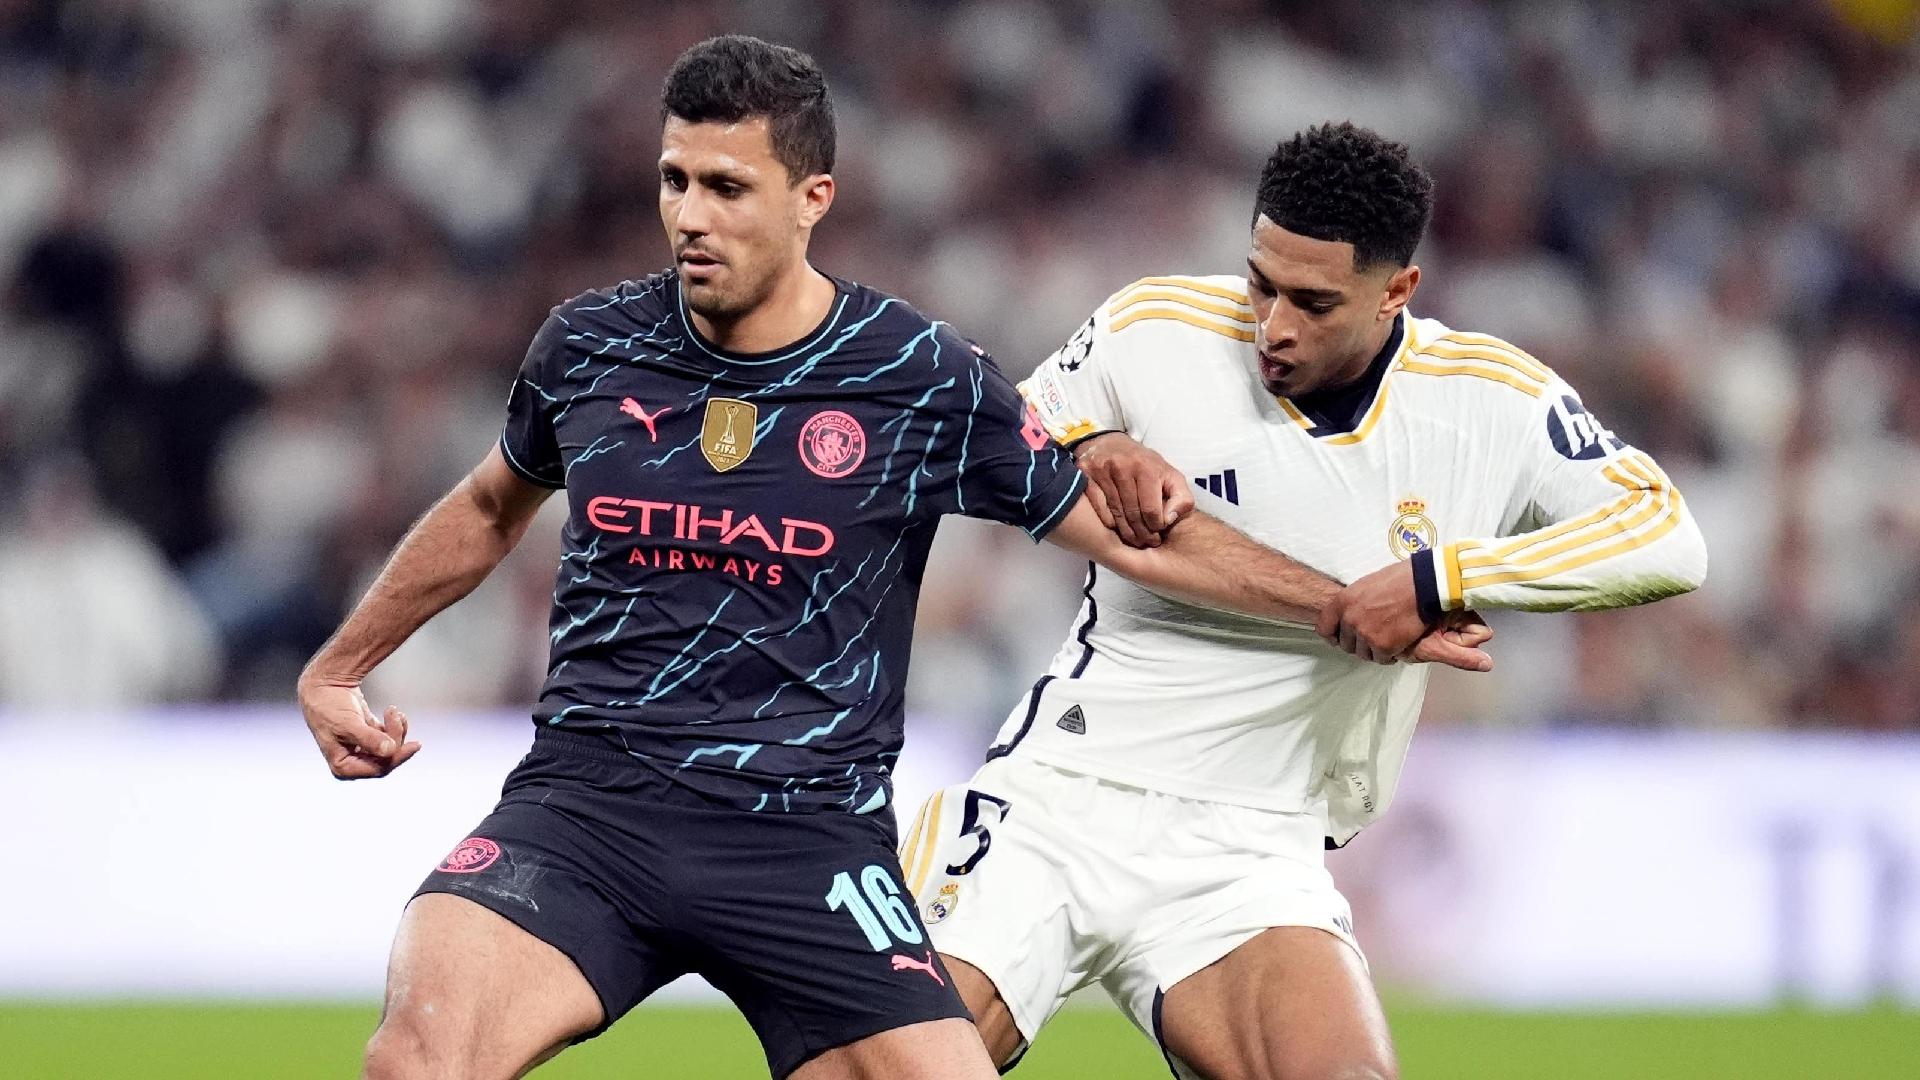 I do need a rest – Rodri admits he needs a break during Man City’s run-in